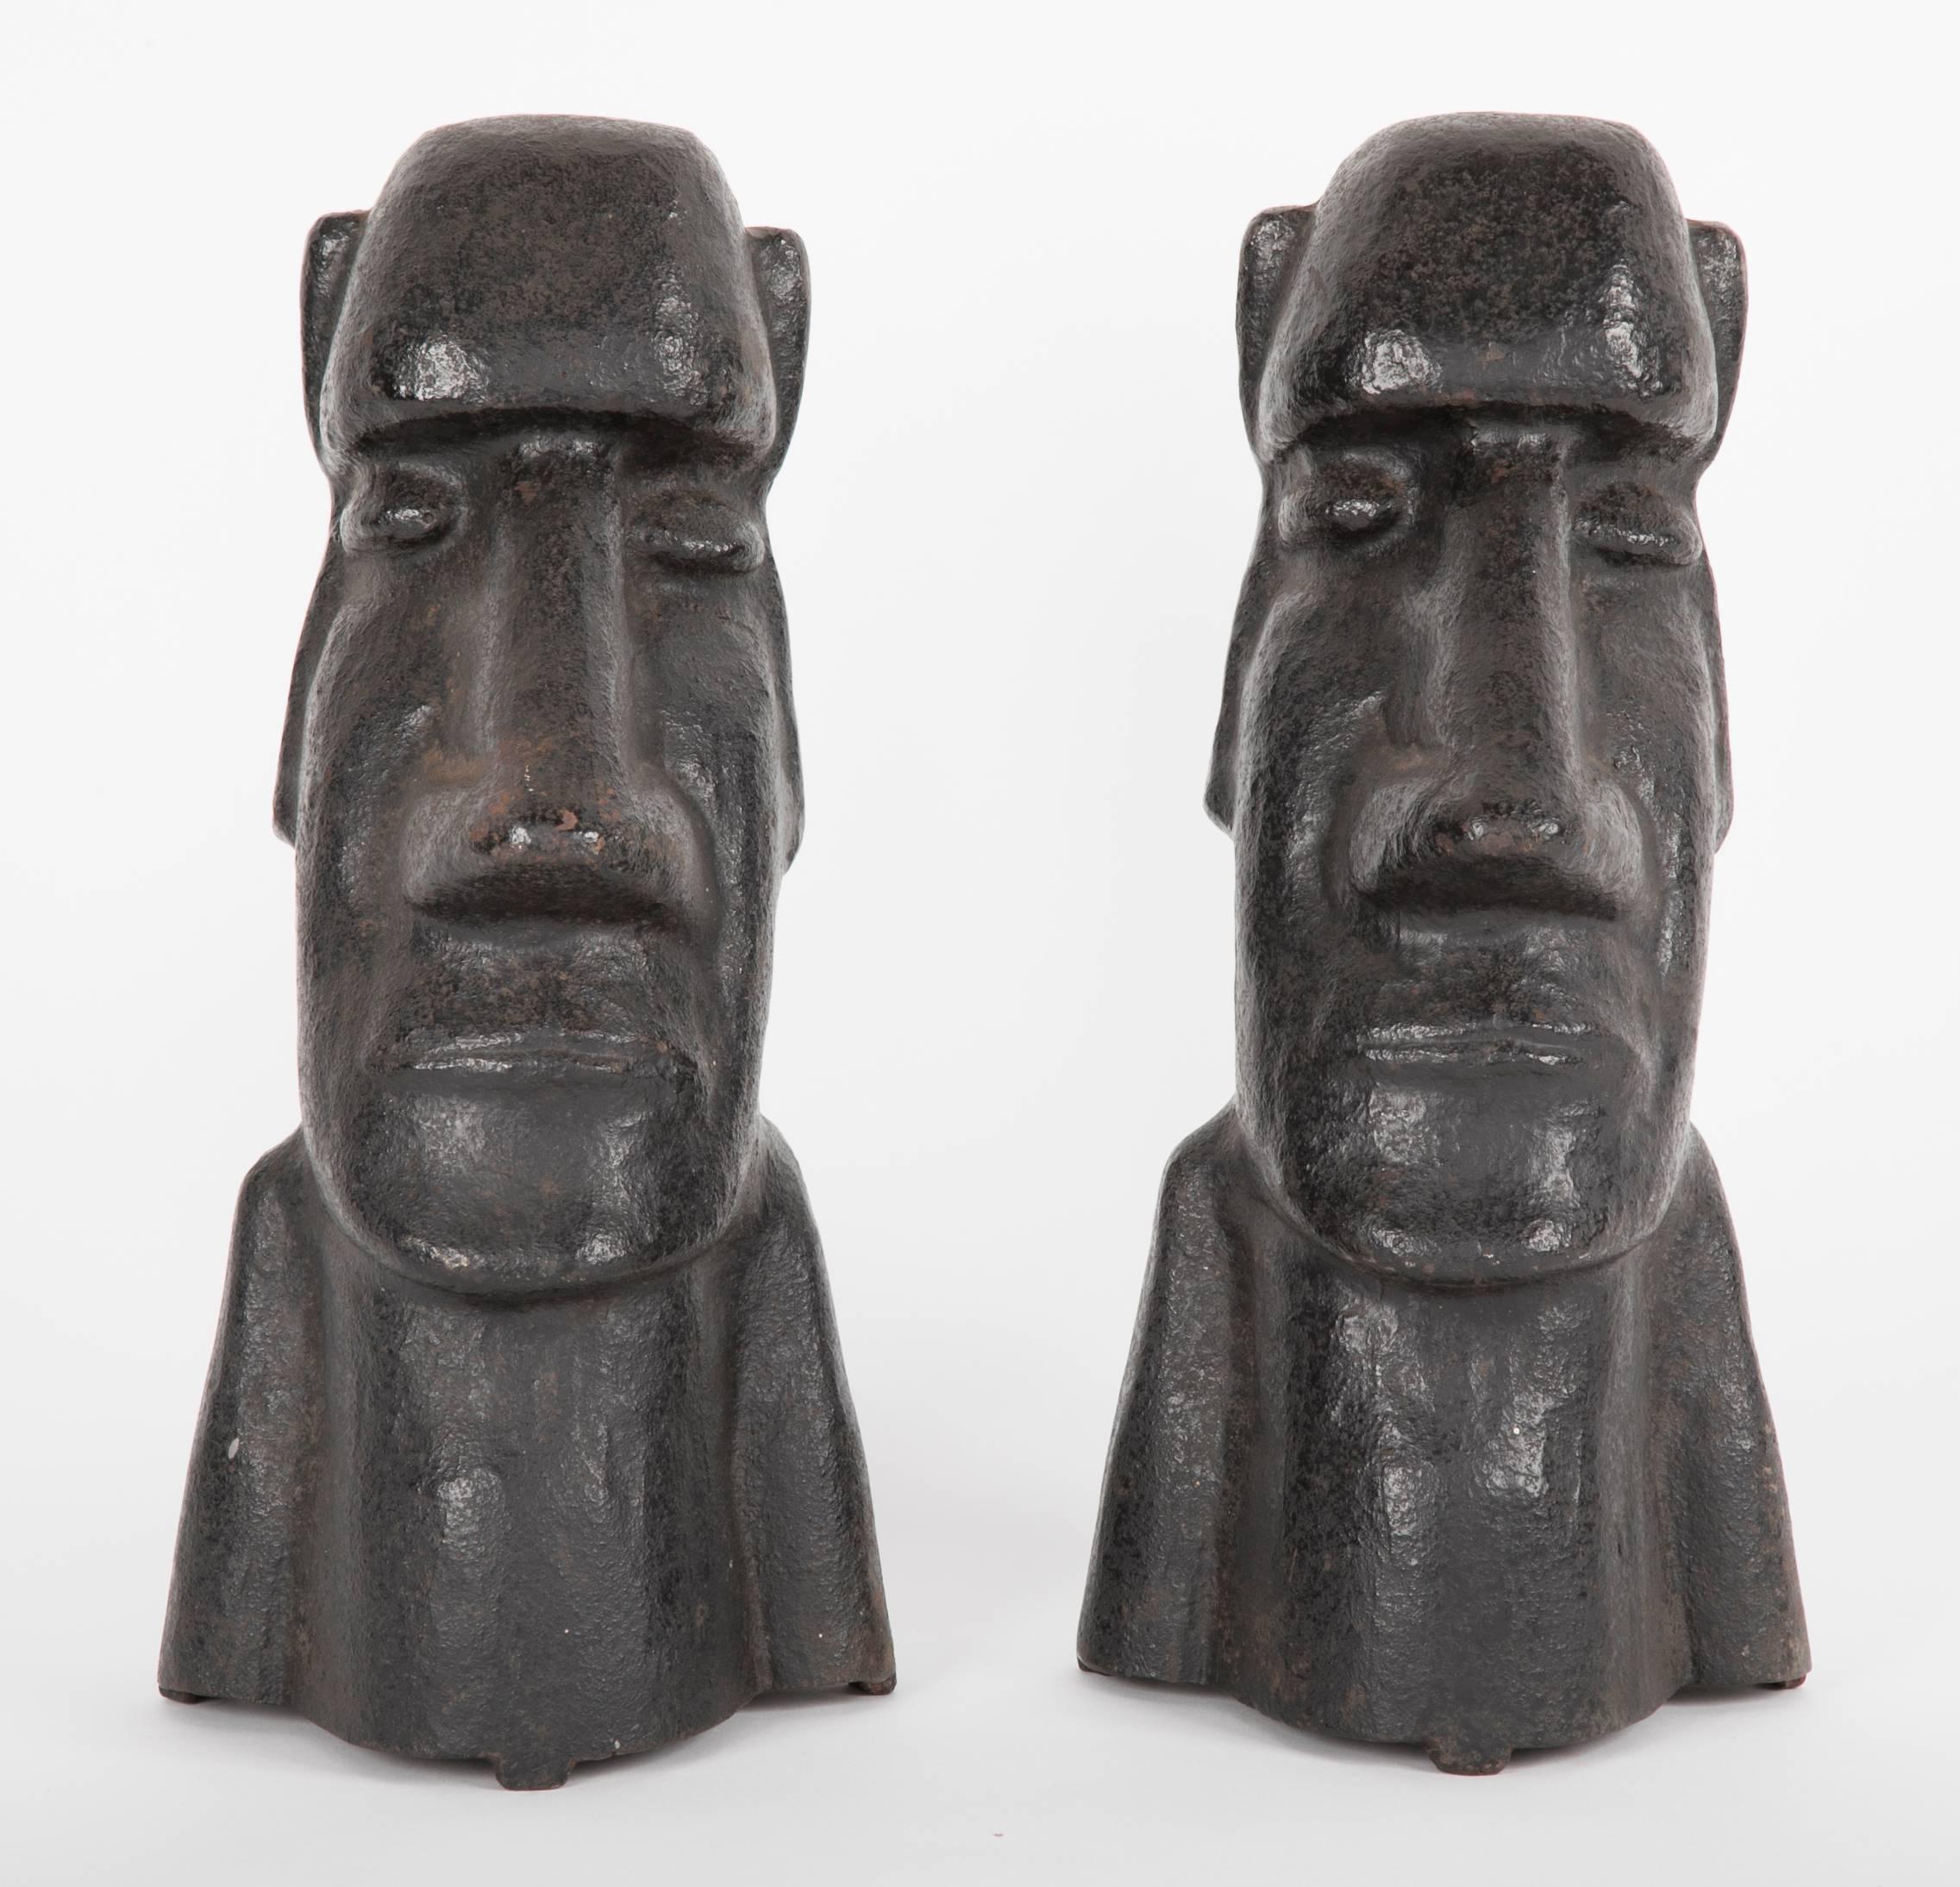 Early 20th century cast iron andirons in the form of the Easter Islands stone statues. Andirons do not have backs, circa 1900-1920.